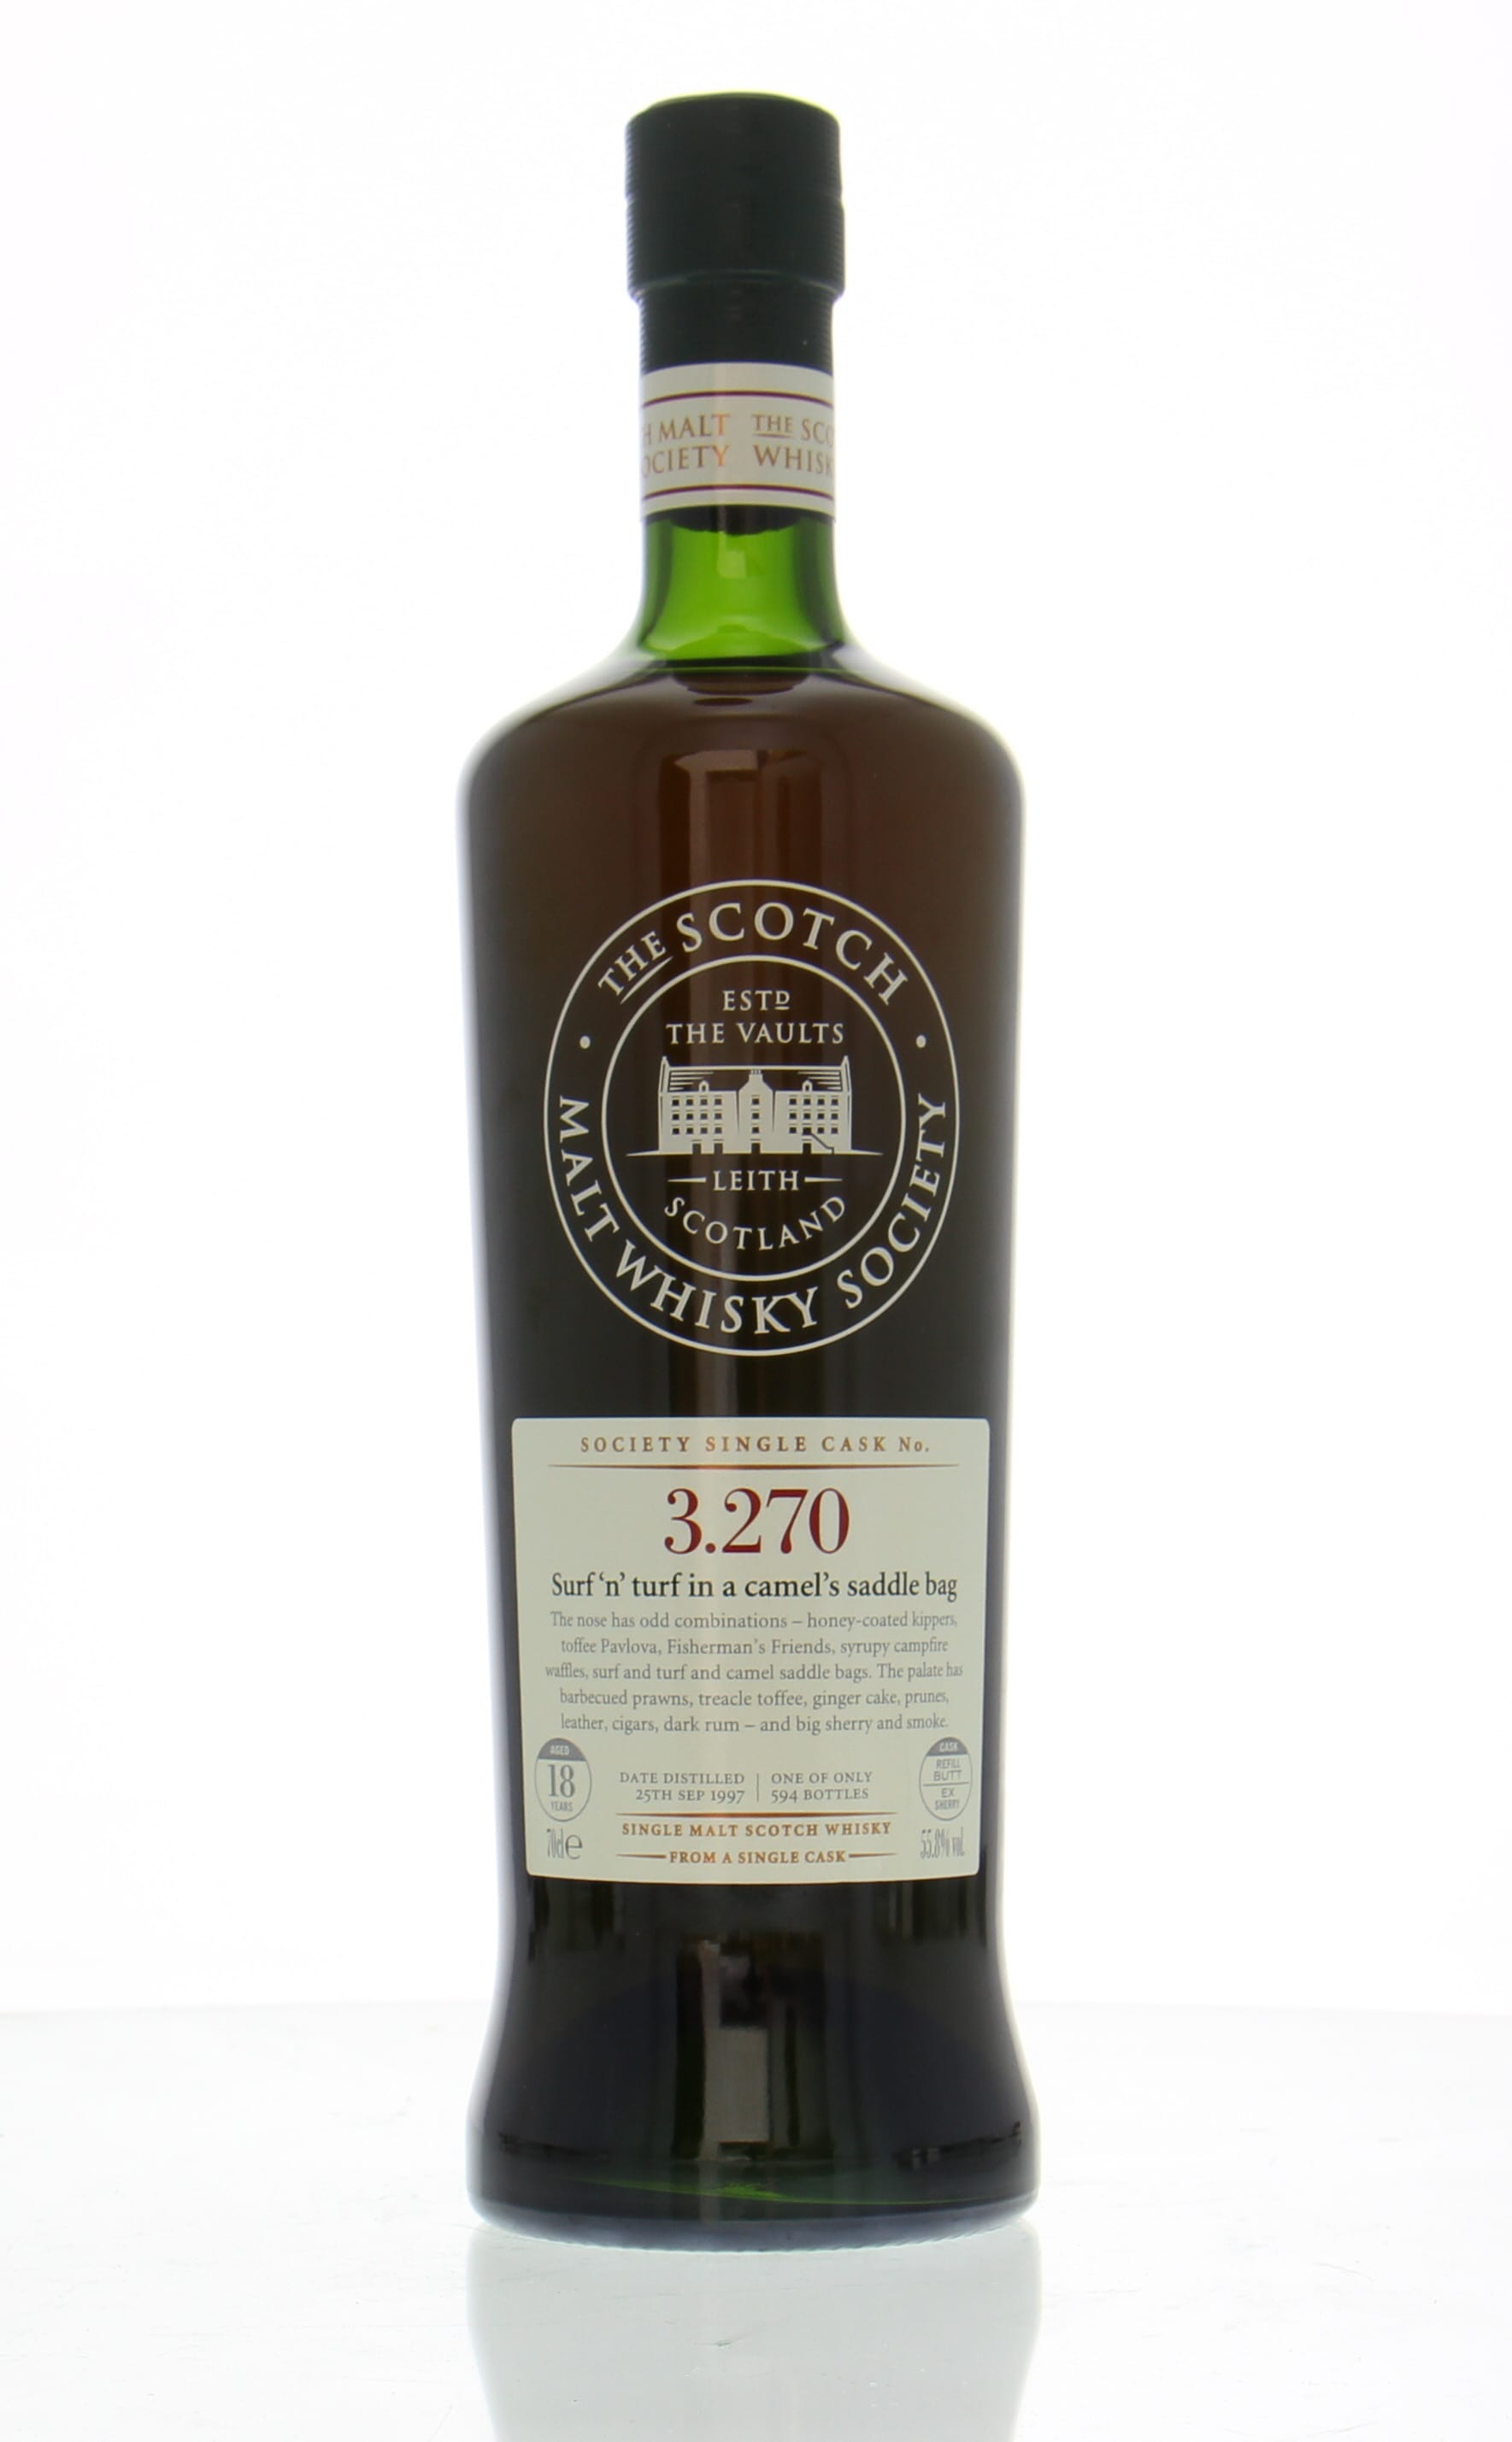 Bowmore - 18 Years Old SMWS 3.270 Surf ‘n' turf in a camel’s saddle bag 55.8% 1997